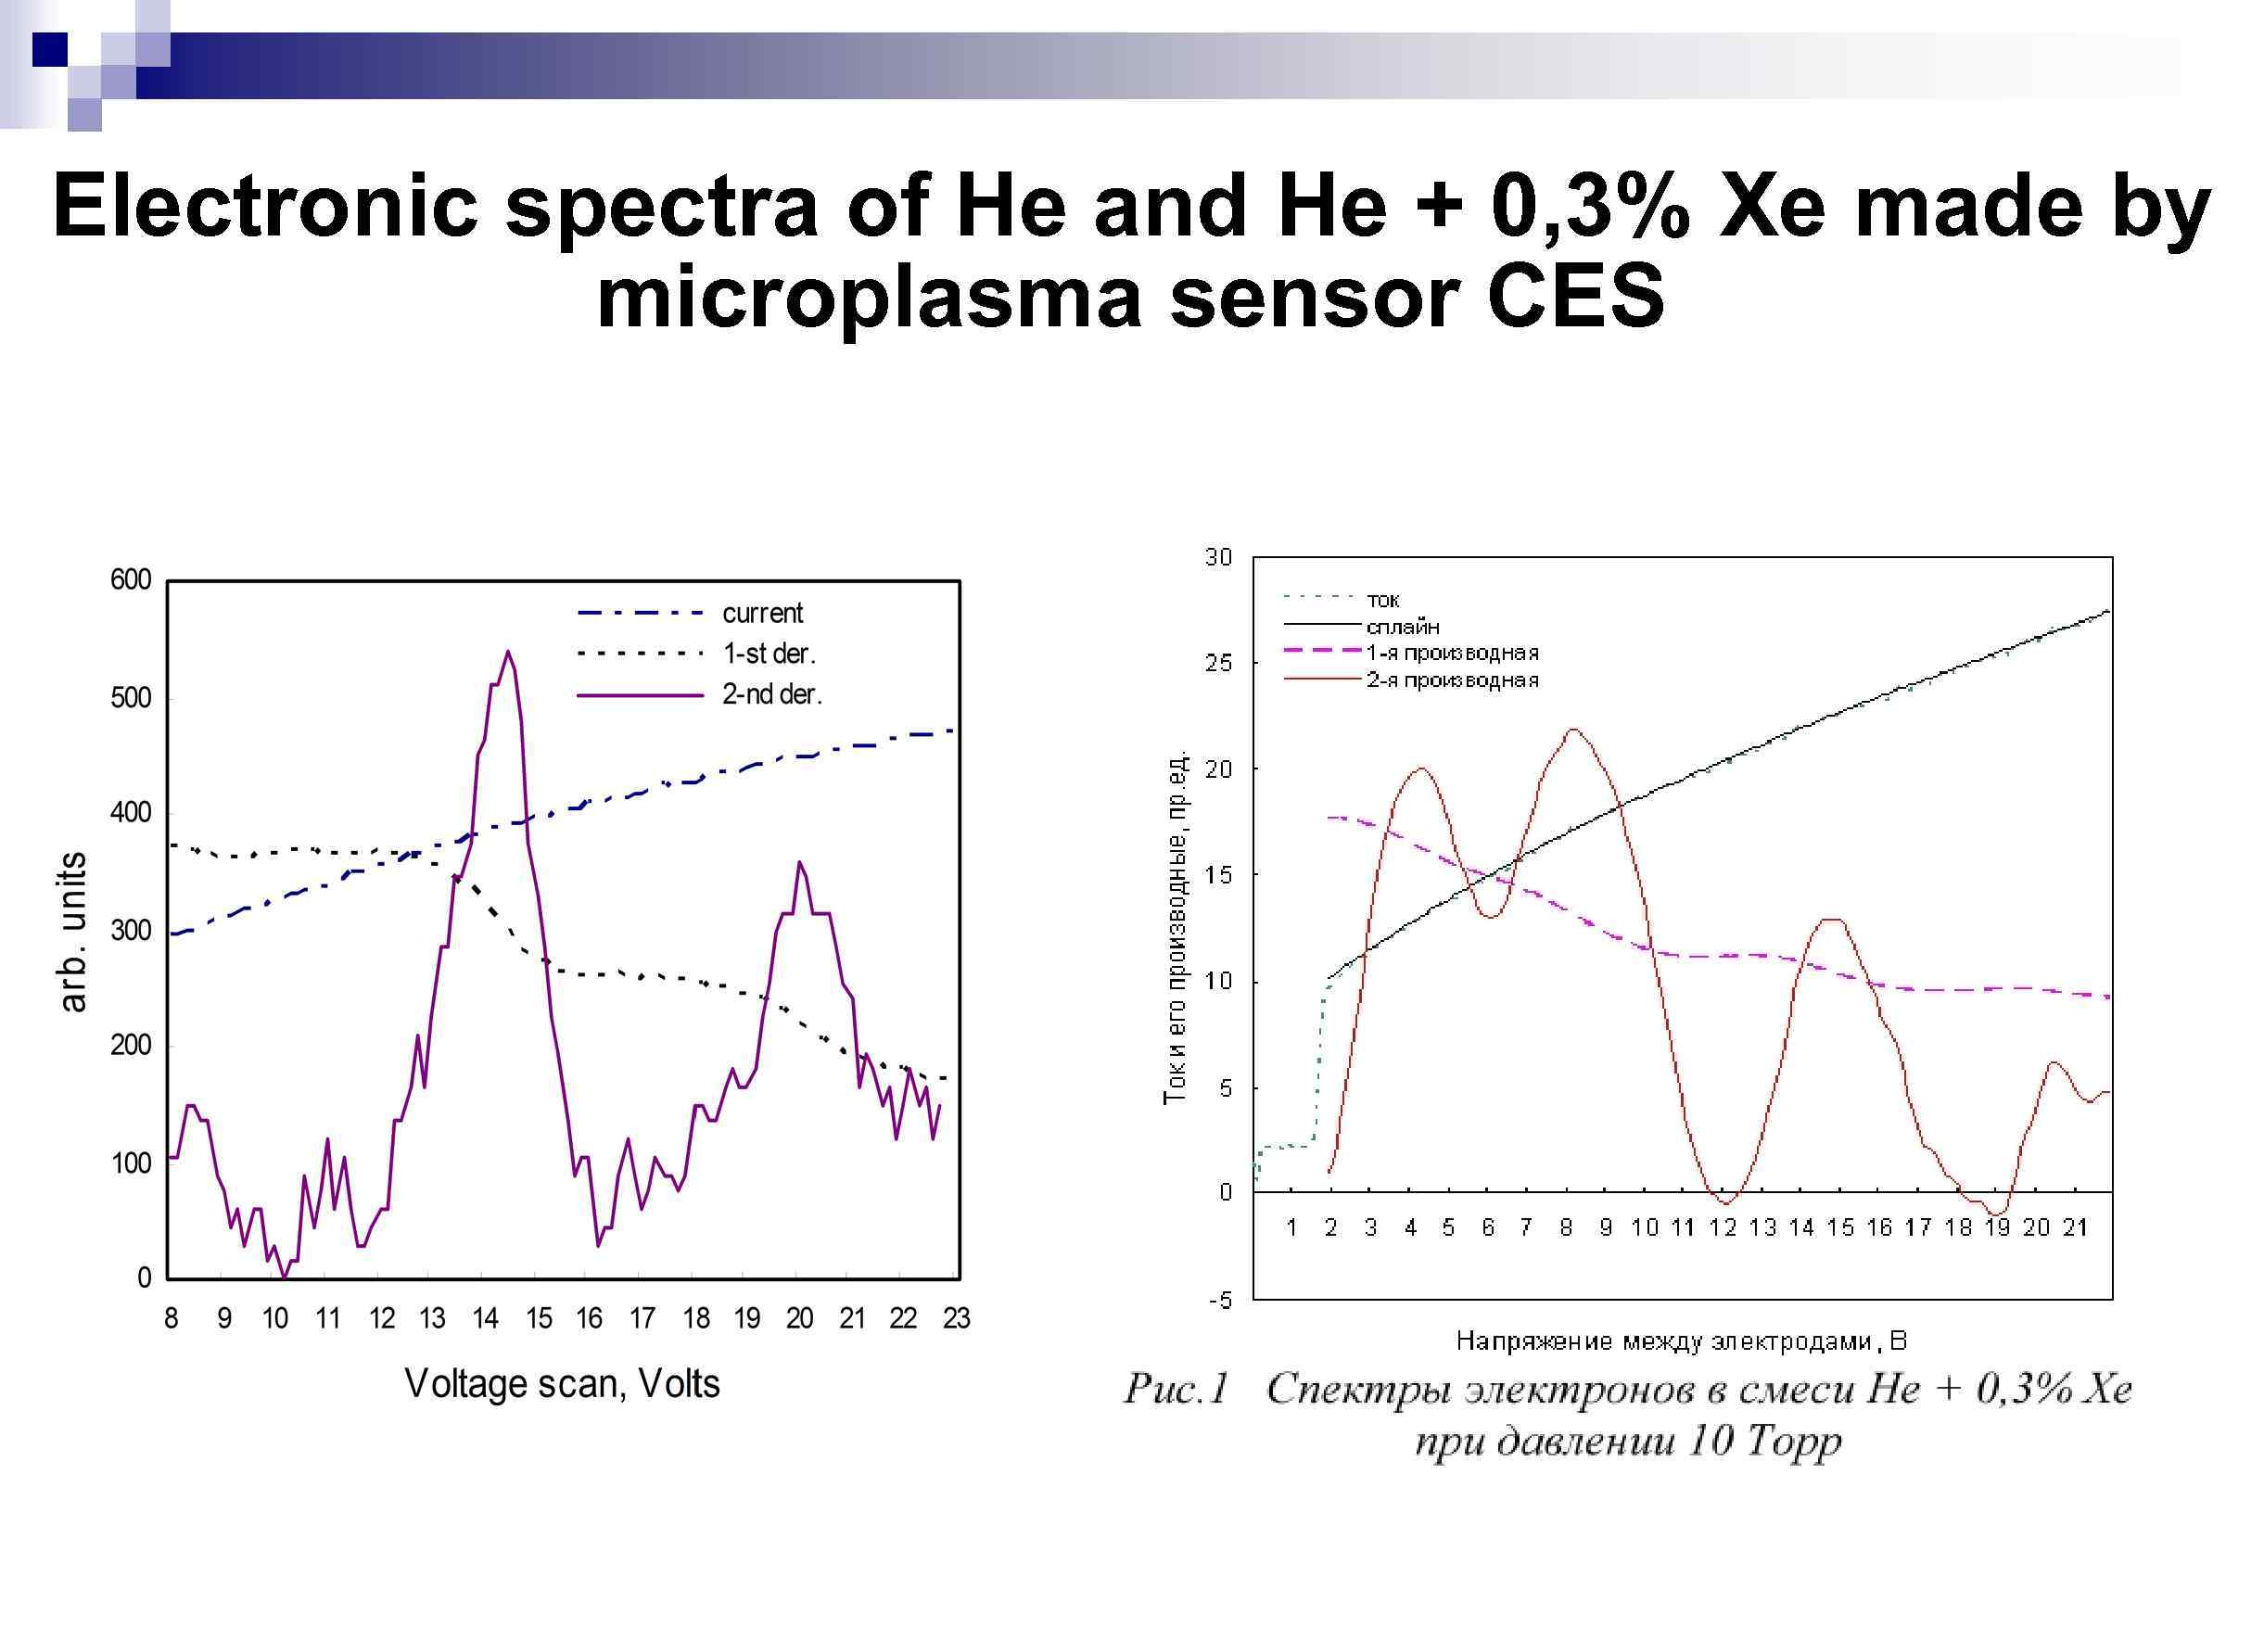 Electronic spectra of He and He + 0, 3% Xe made by microplasma sensor